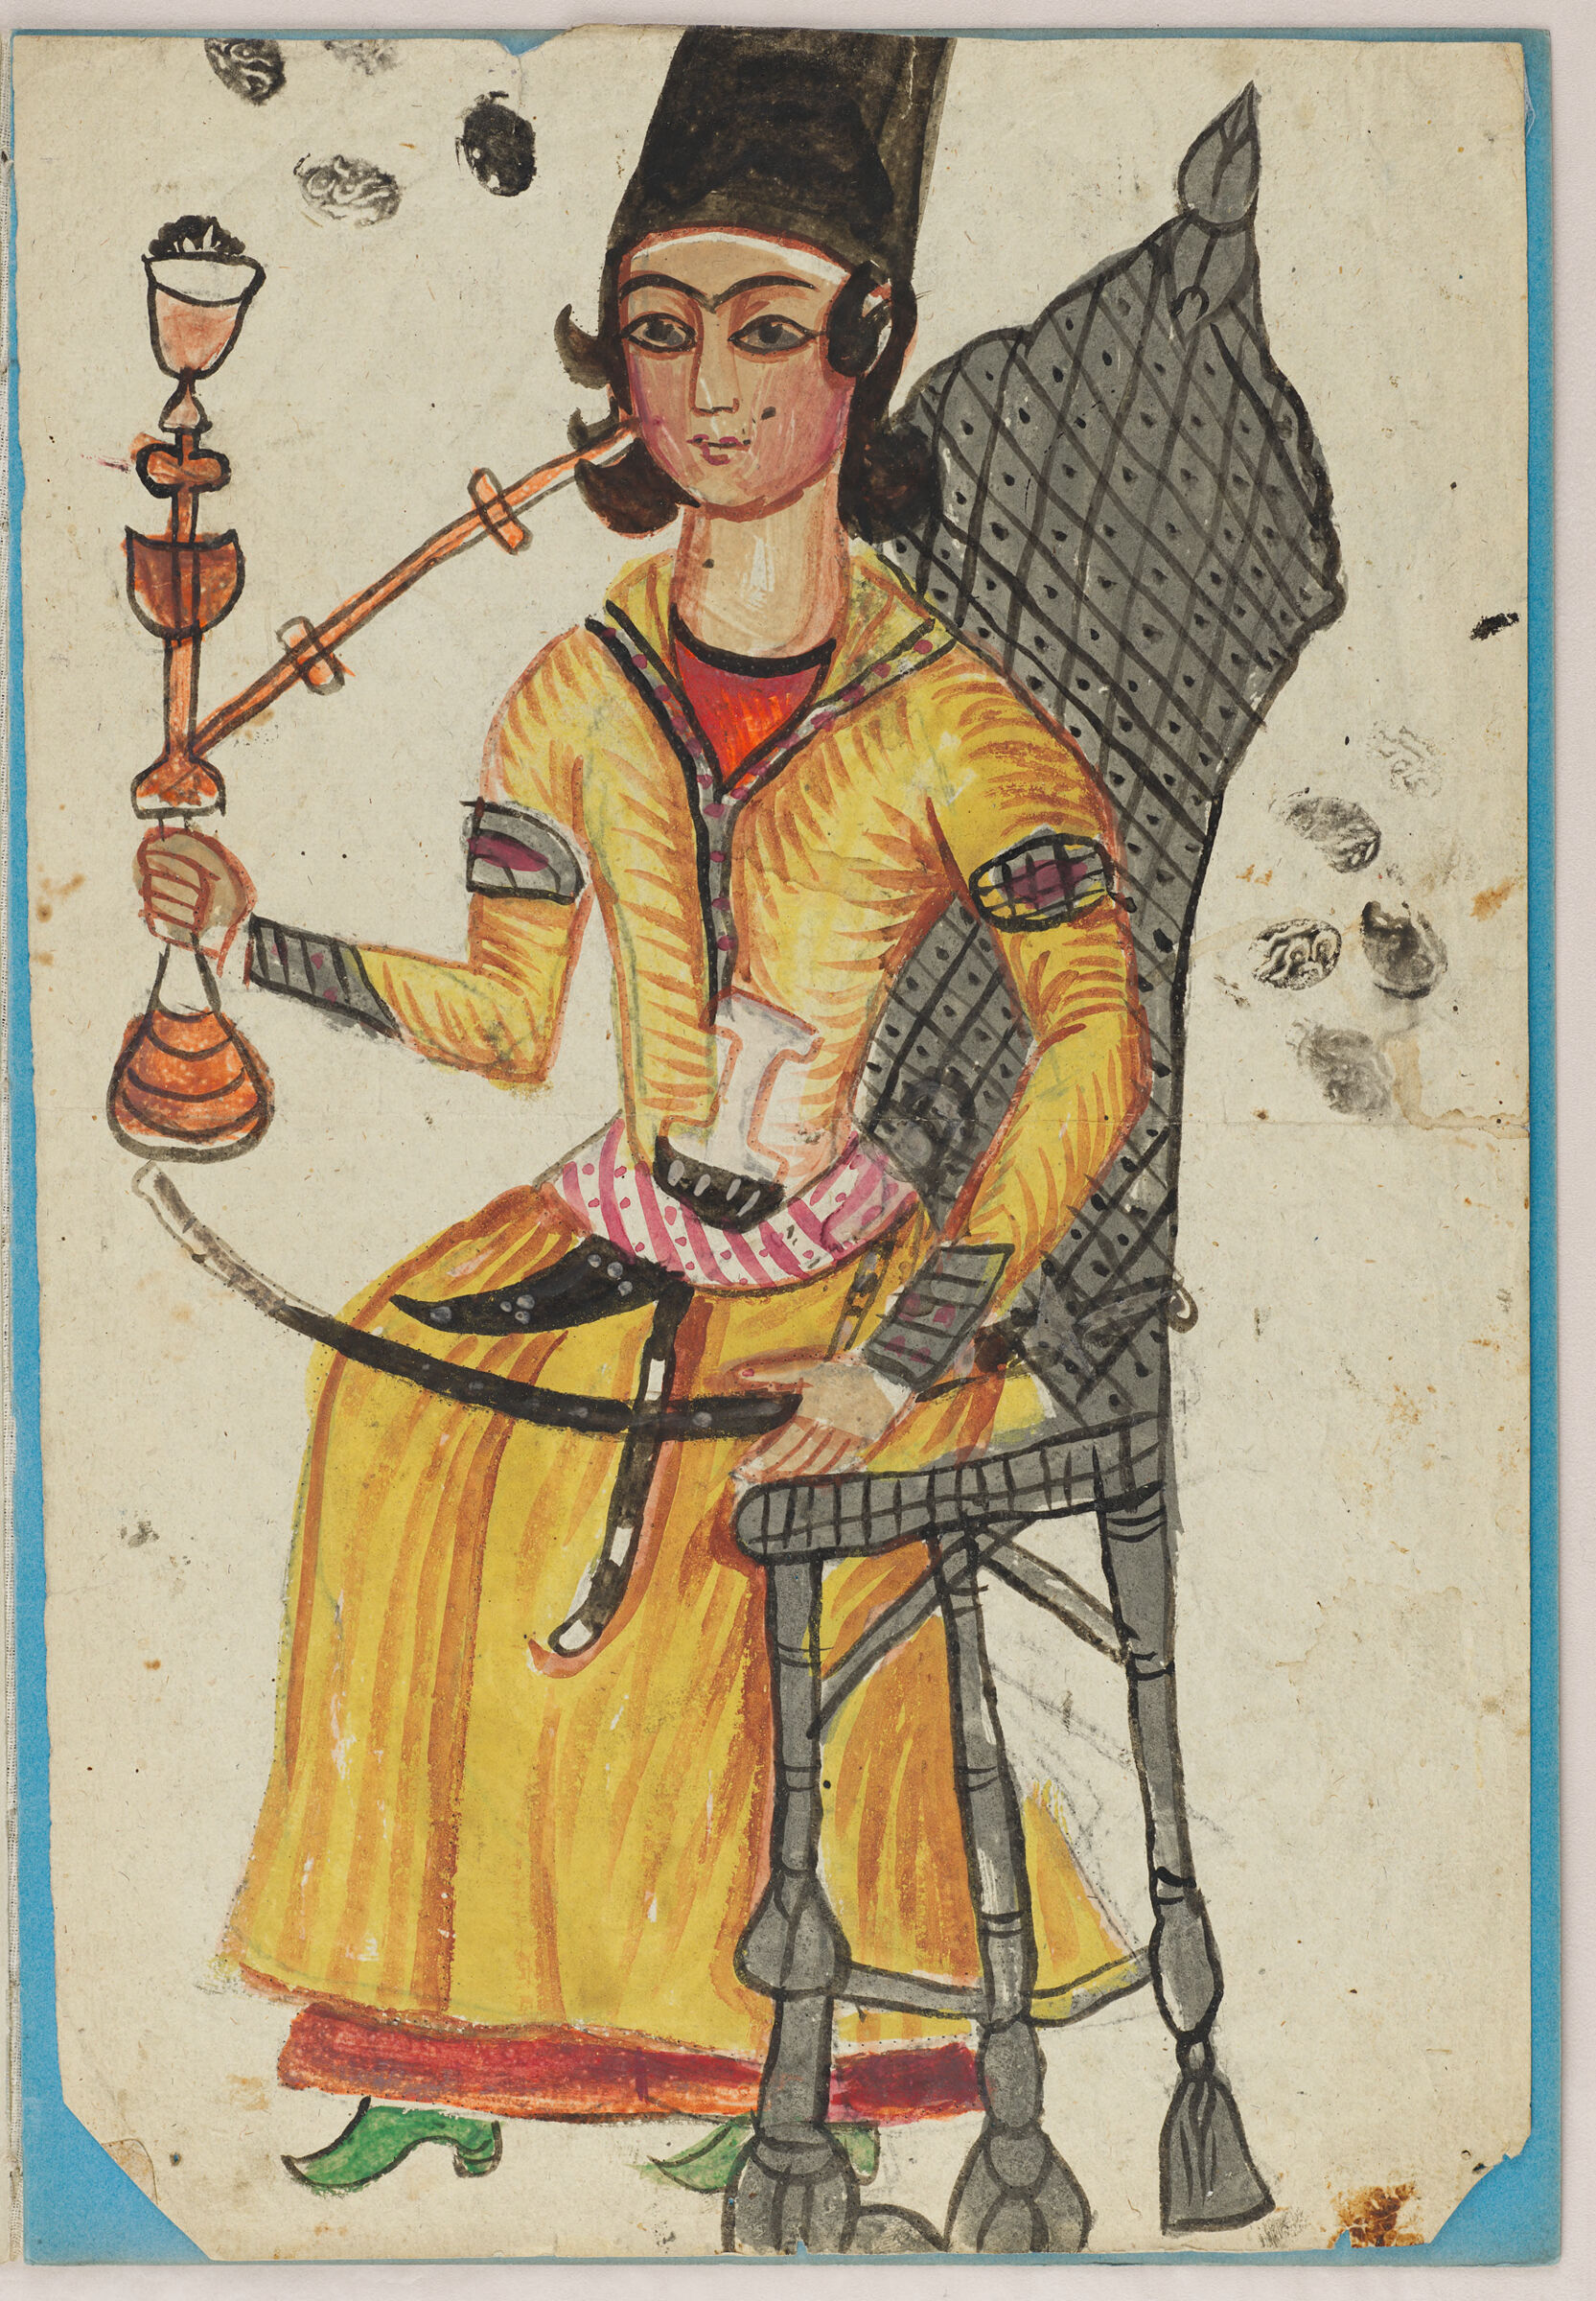 Folio 47 From An Album Of Drawings And Paintings: Man Splitting Wood (Recto); Qajar Youth Seated In A Chair With Waterpipe And Sword (Verso)